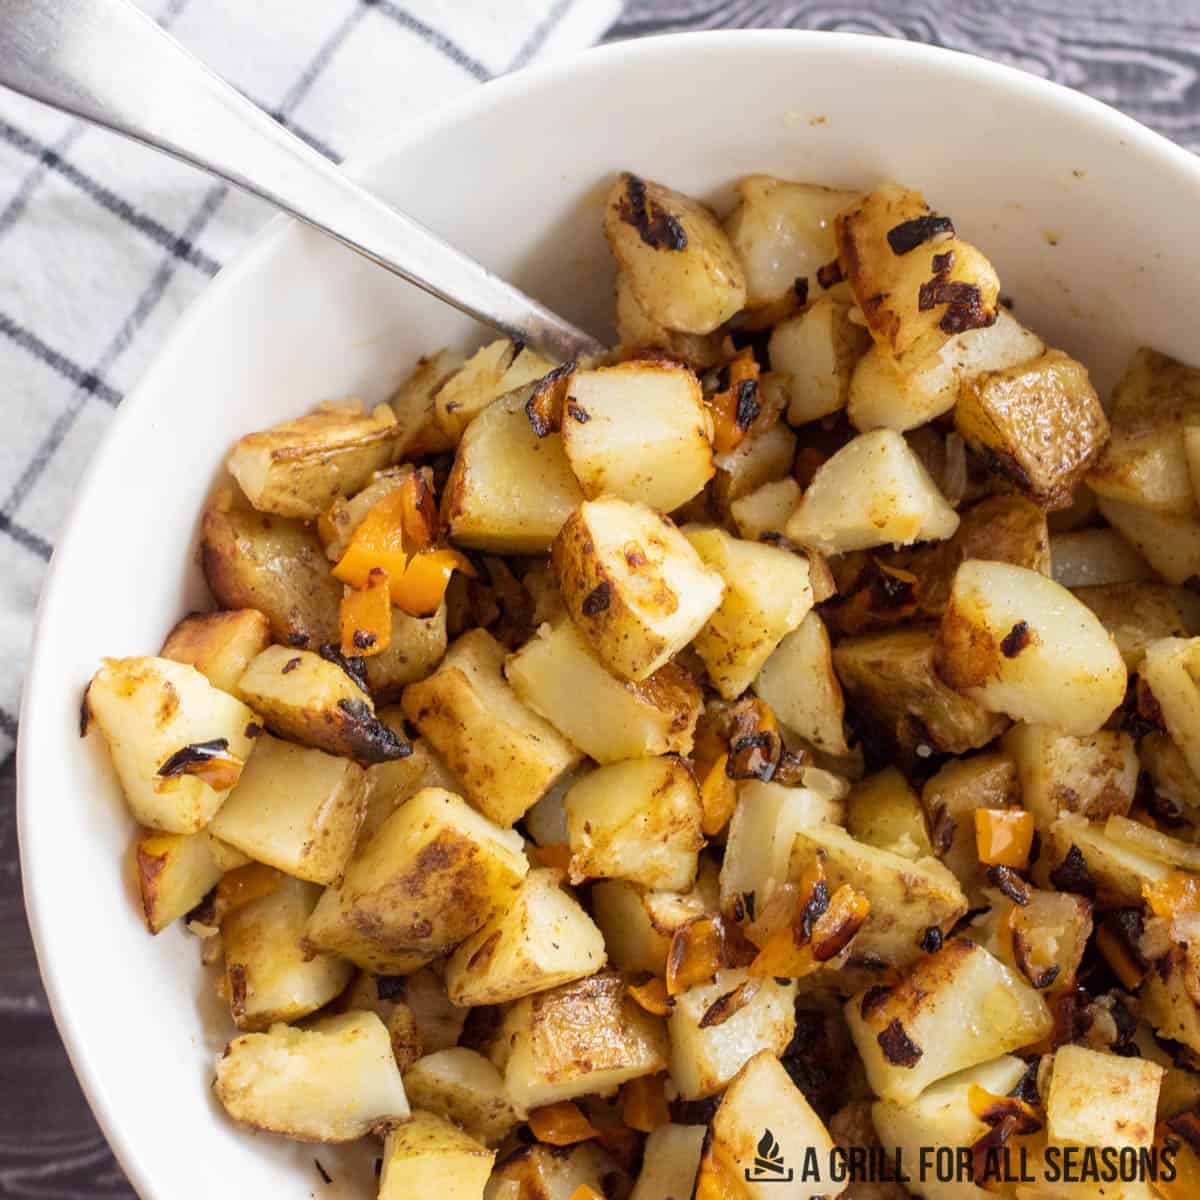 Cubed cooked potatoes with onions in a bowl.